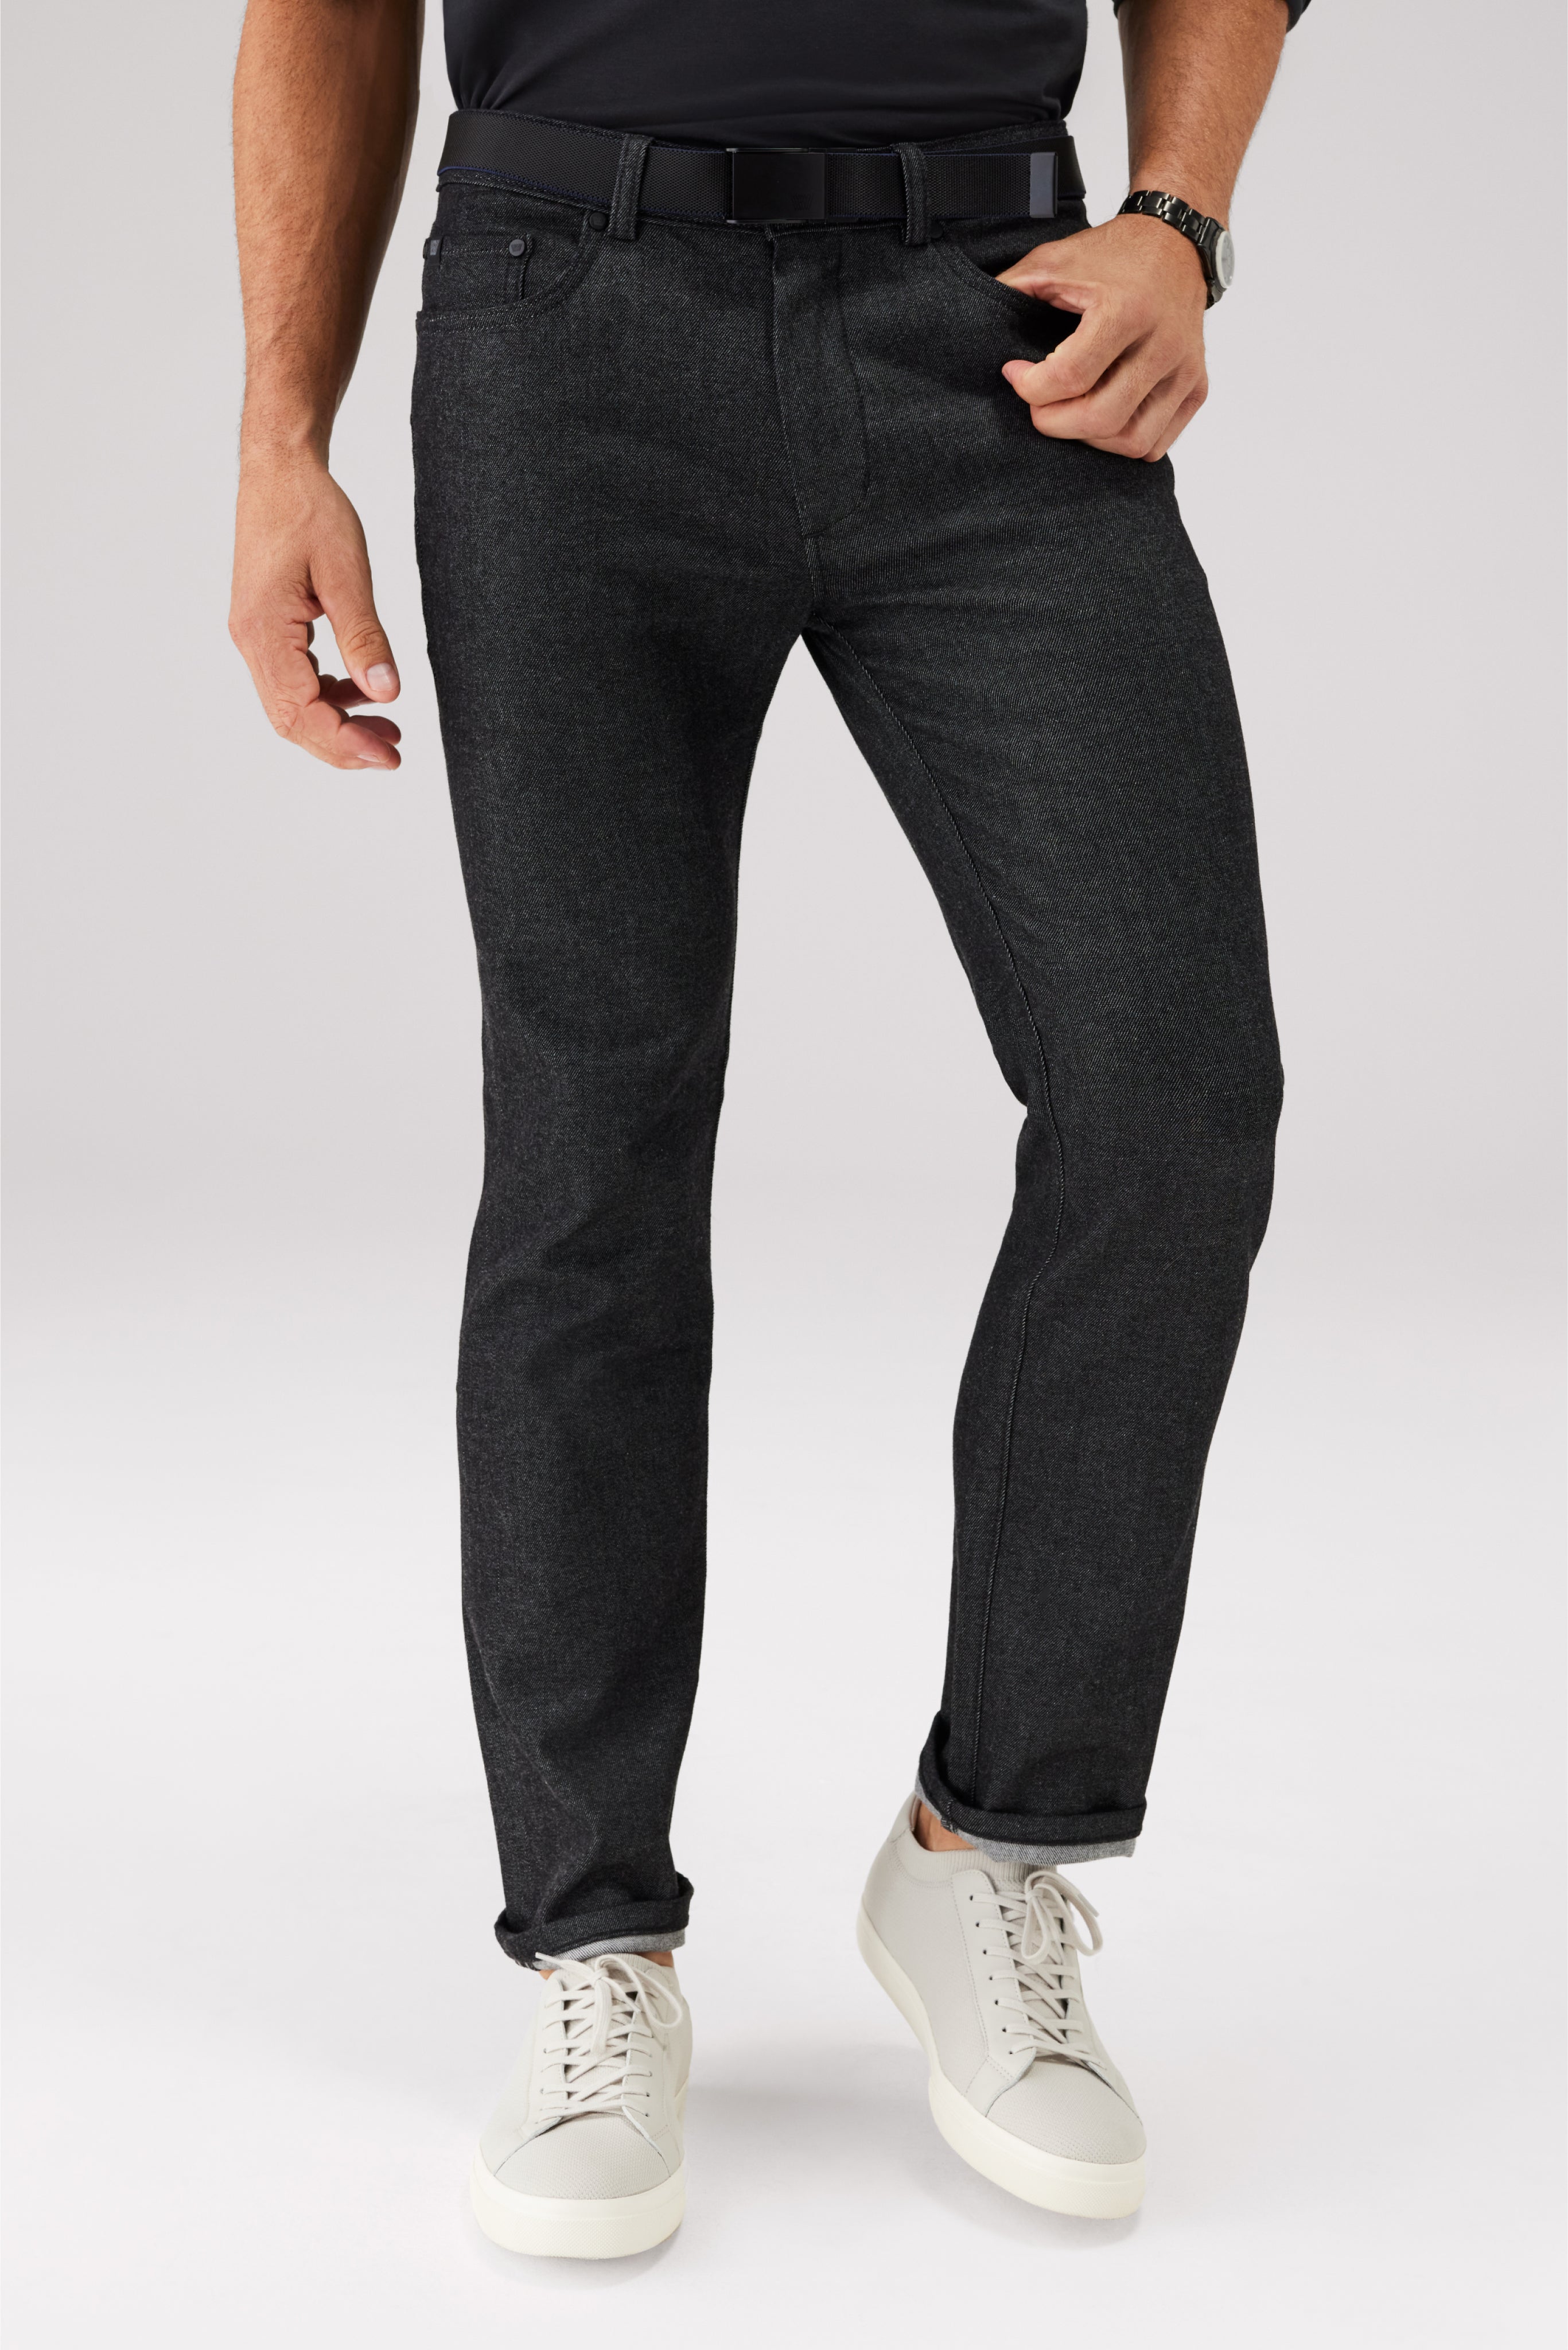 Buy Grey Jeans for Men by SUPERDRY Online | Ajio.com